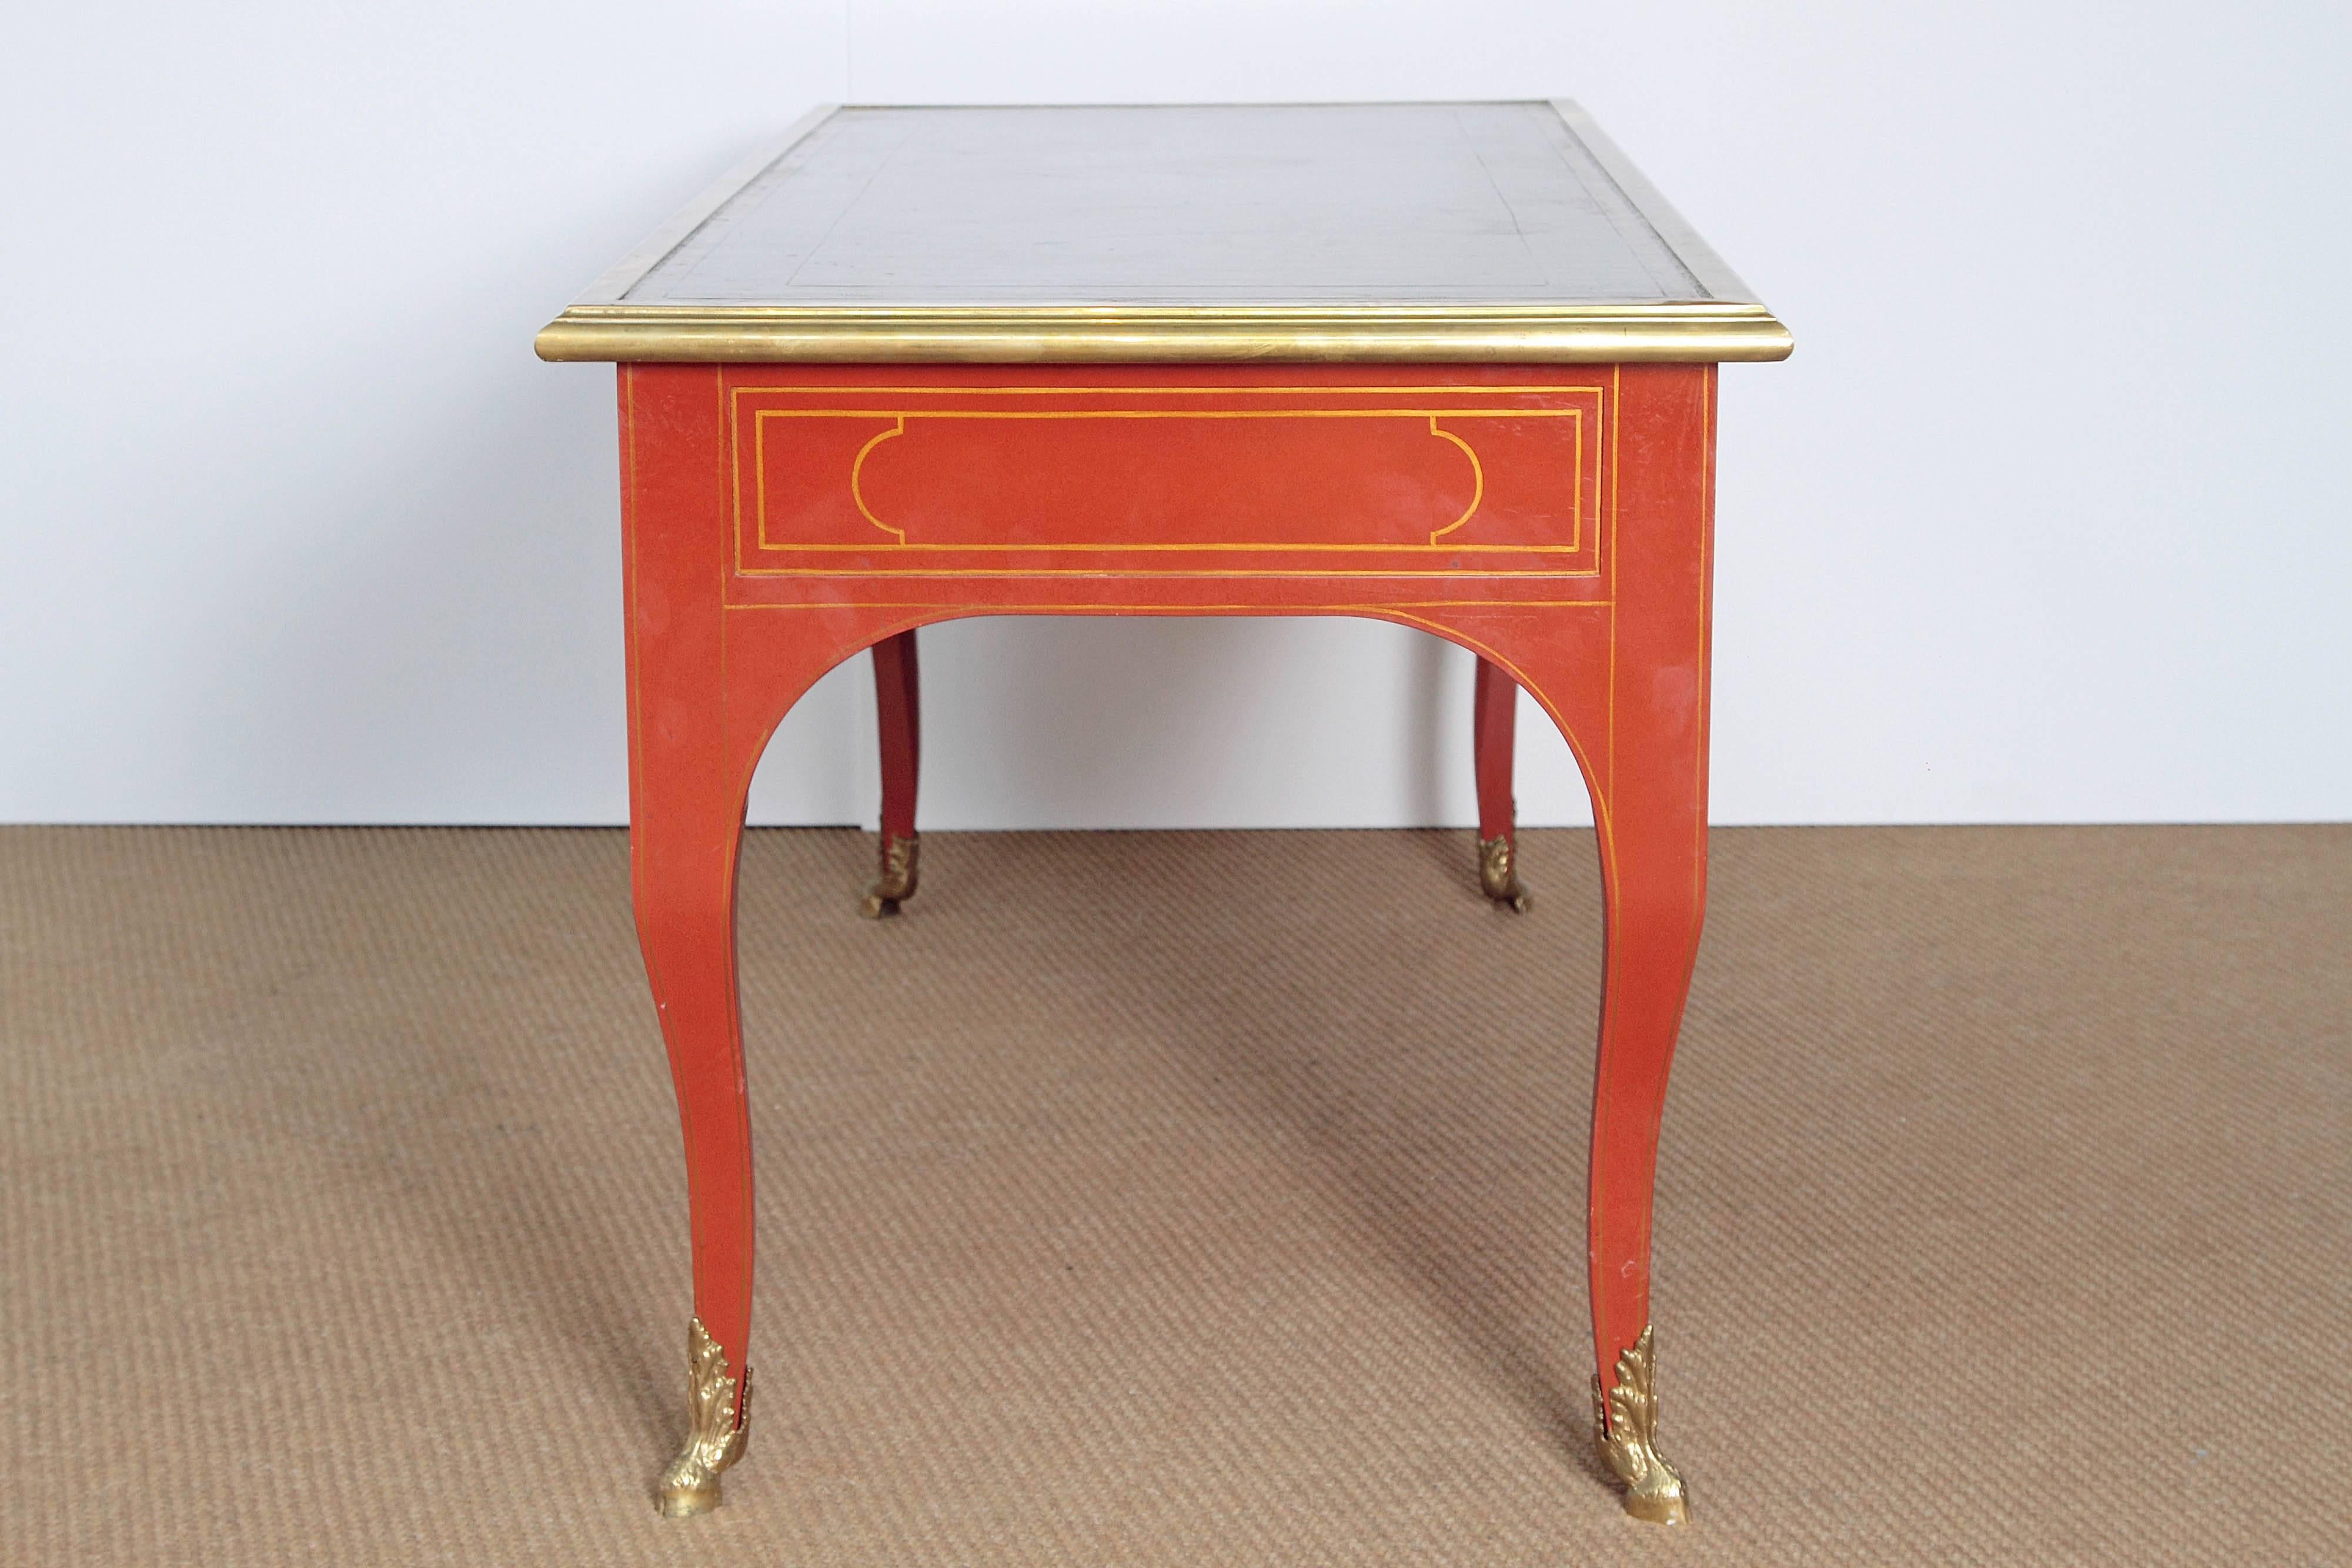 an orange lacquered Louis XV reproduction writing desk / bureau plat by Baker Furniture Collector's Edition reproduced from a French original circa 1720, with rich leather top / writing surface, hand tooled with gold borders, gilt striping and Sabot